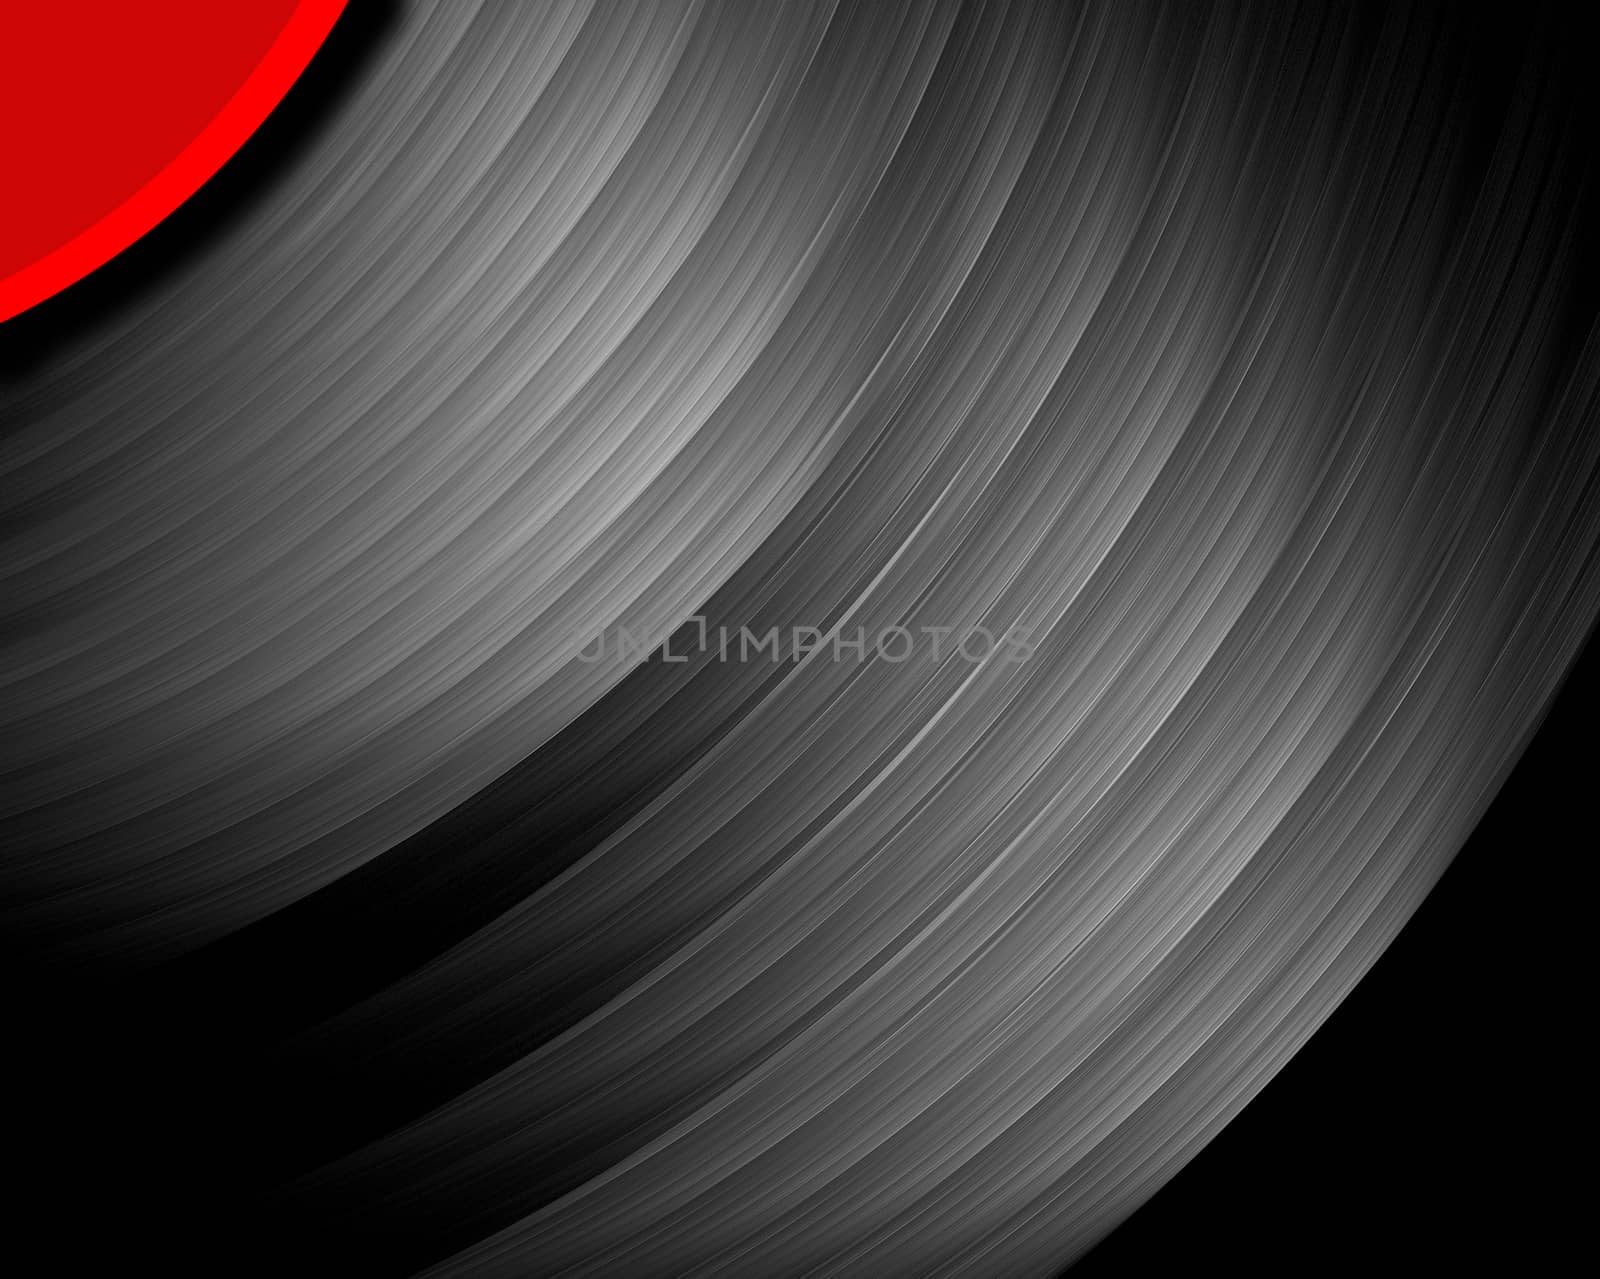 A fractal rendering of a 12 inch vinyl record.